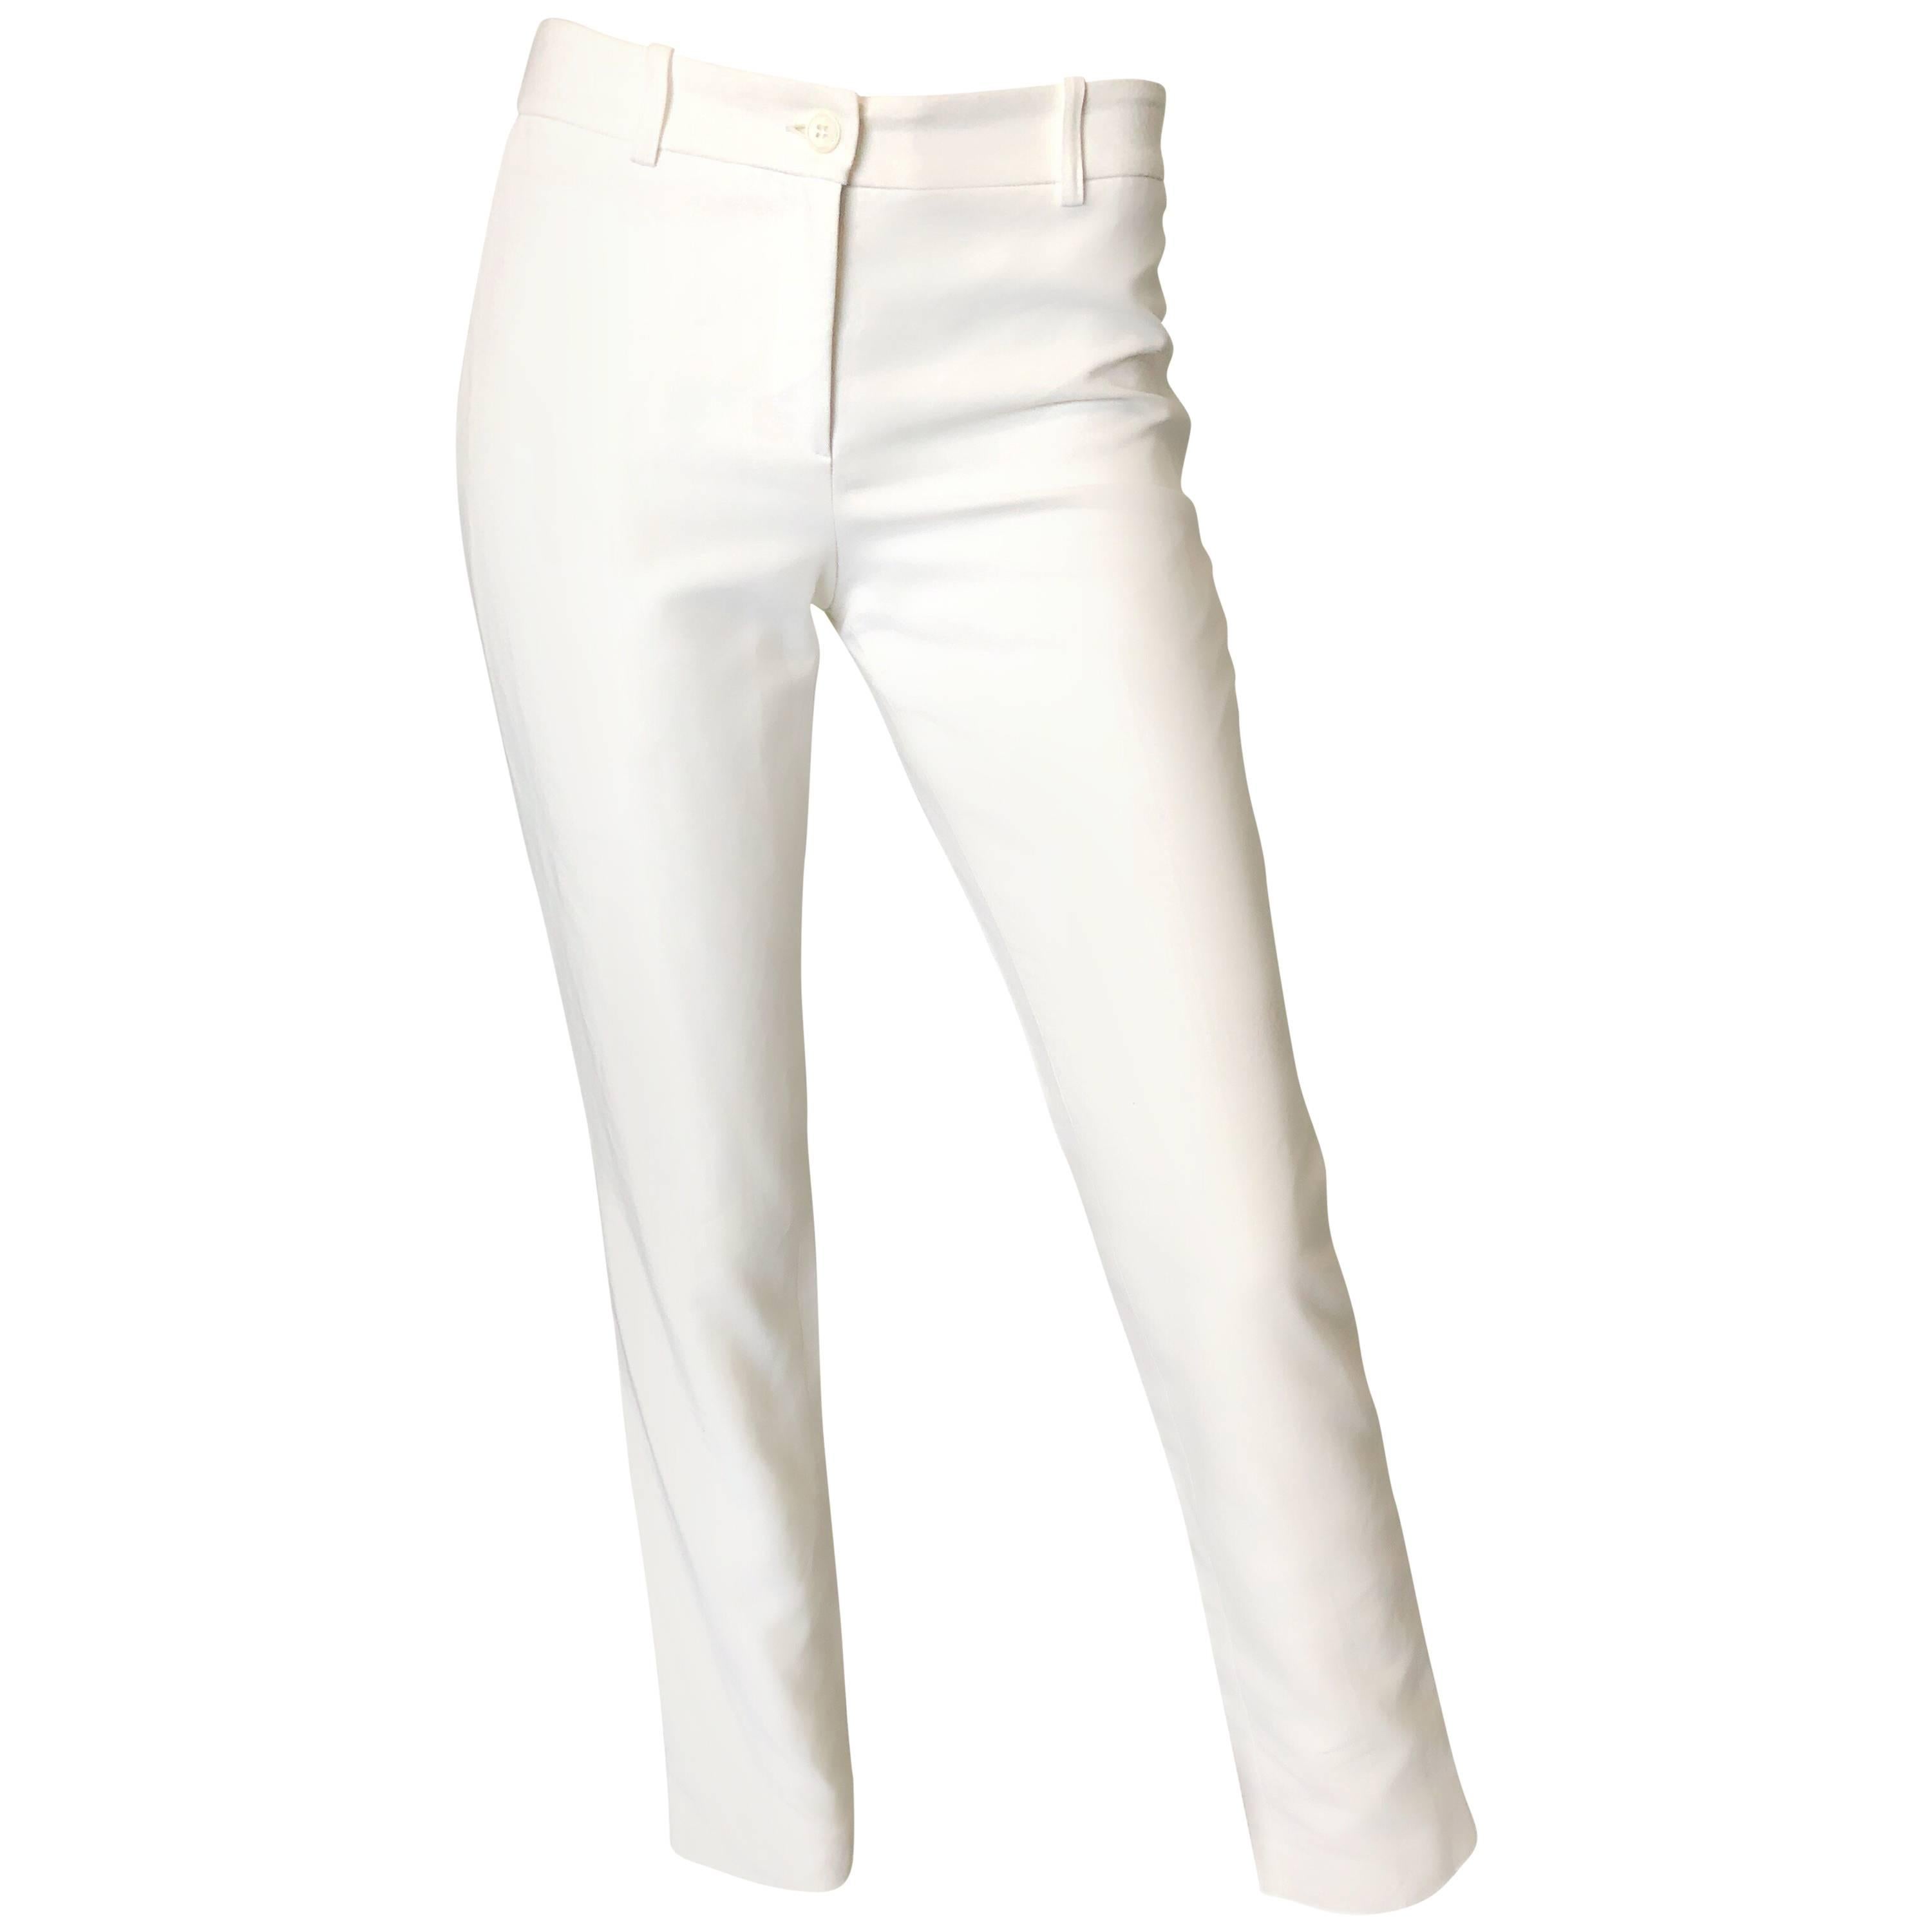 2000s Michael Kors Collection Size 2 White High Waisted Slim Cigarette Pants